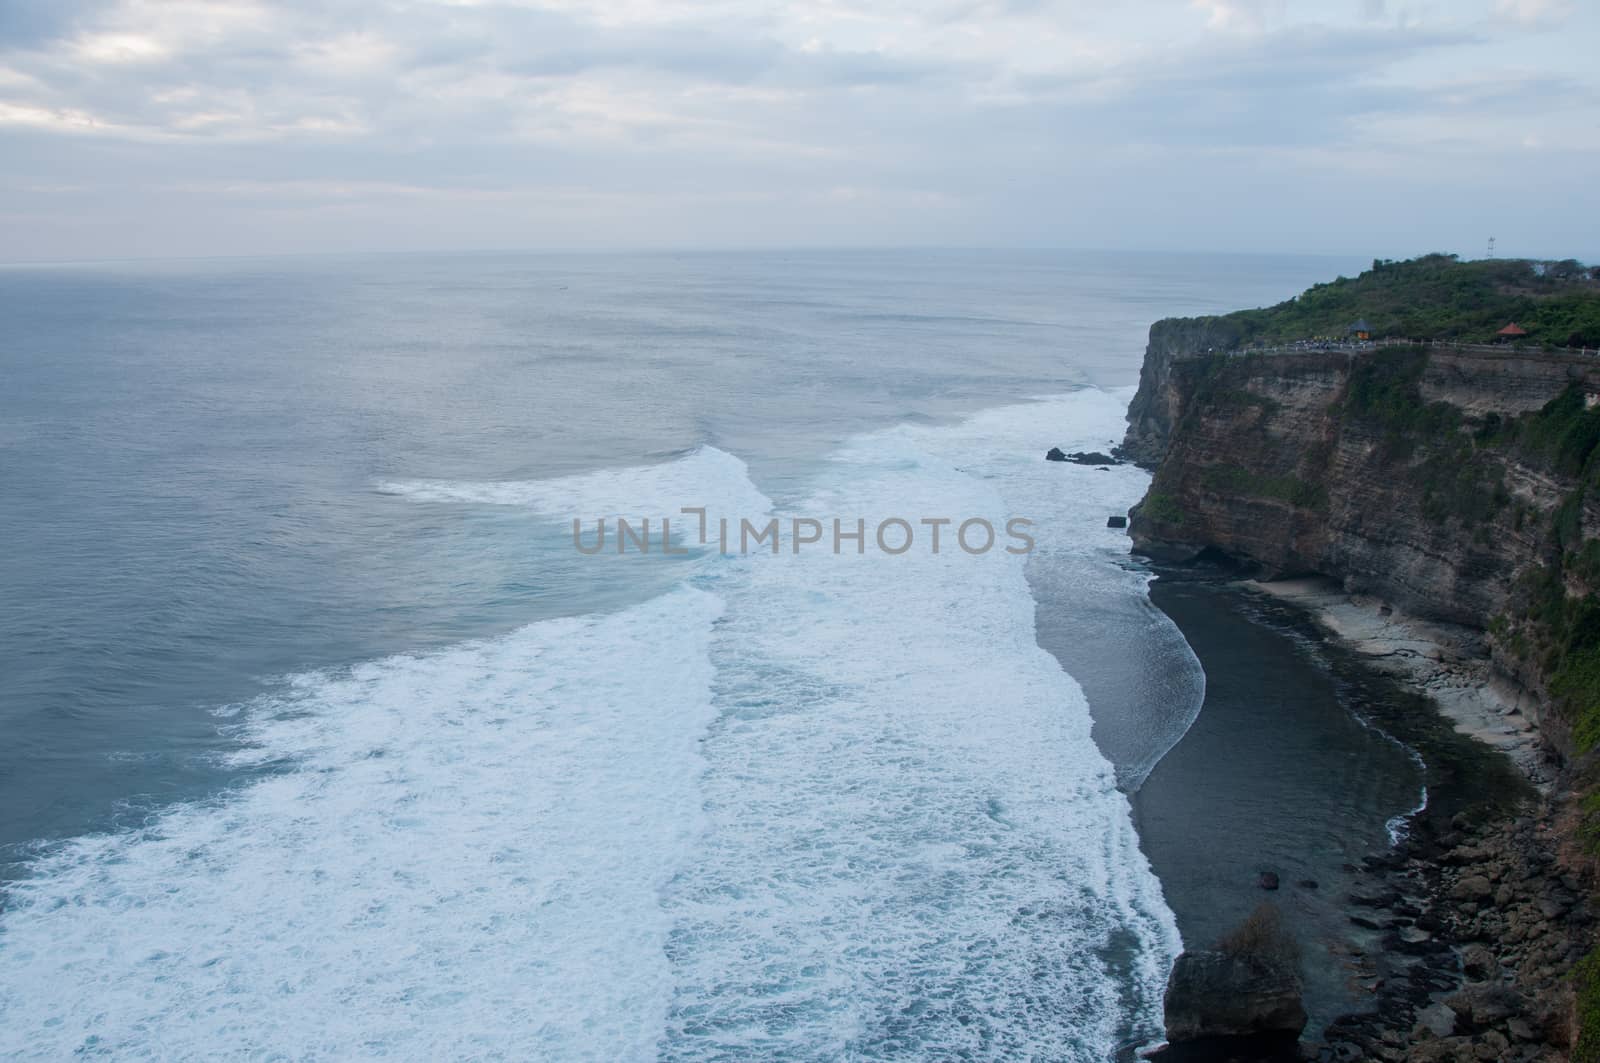 High big clift with stunning beach in Bali